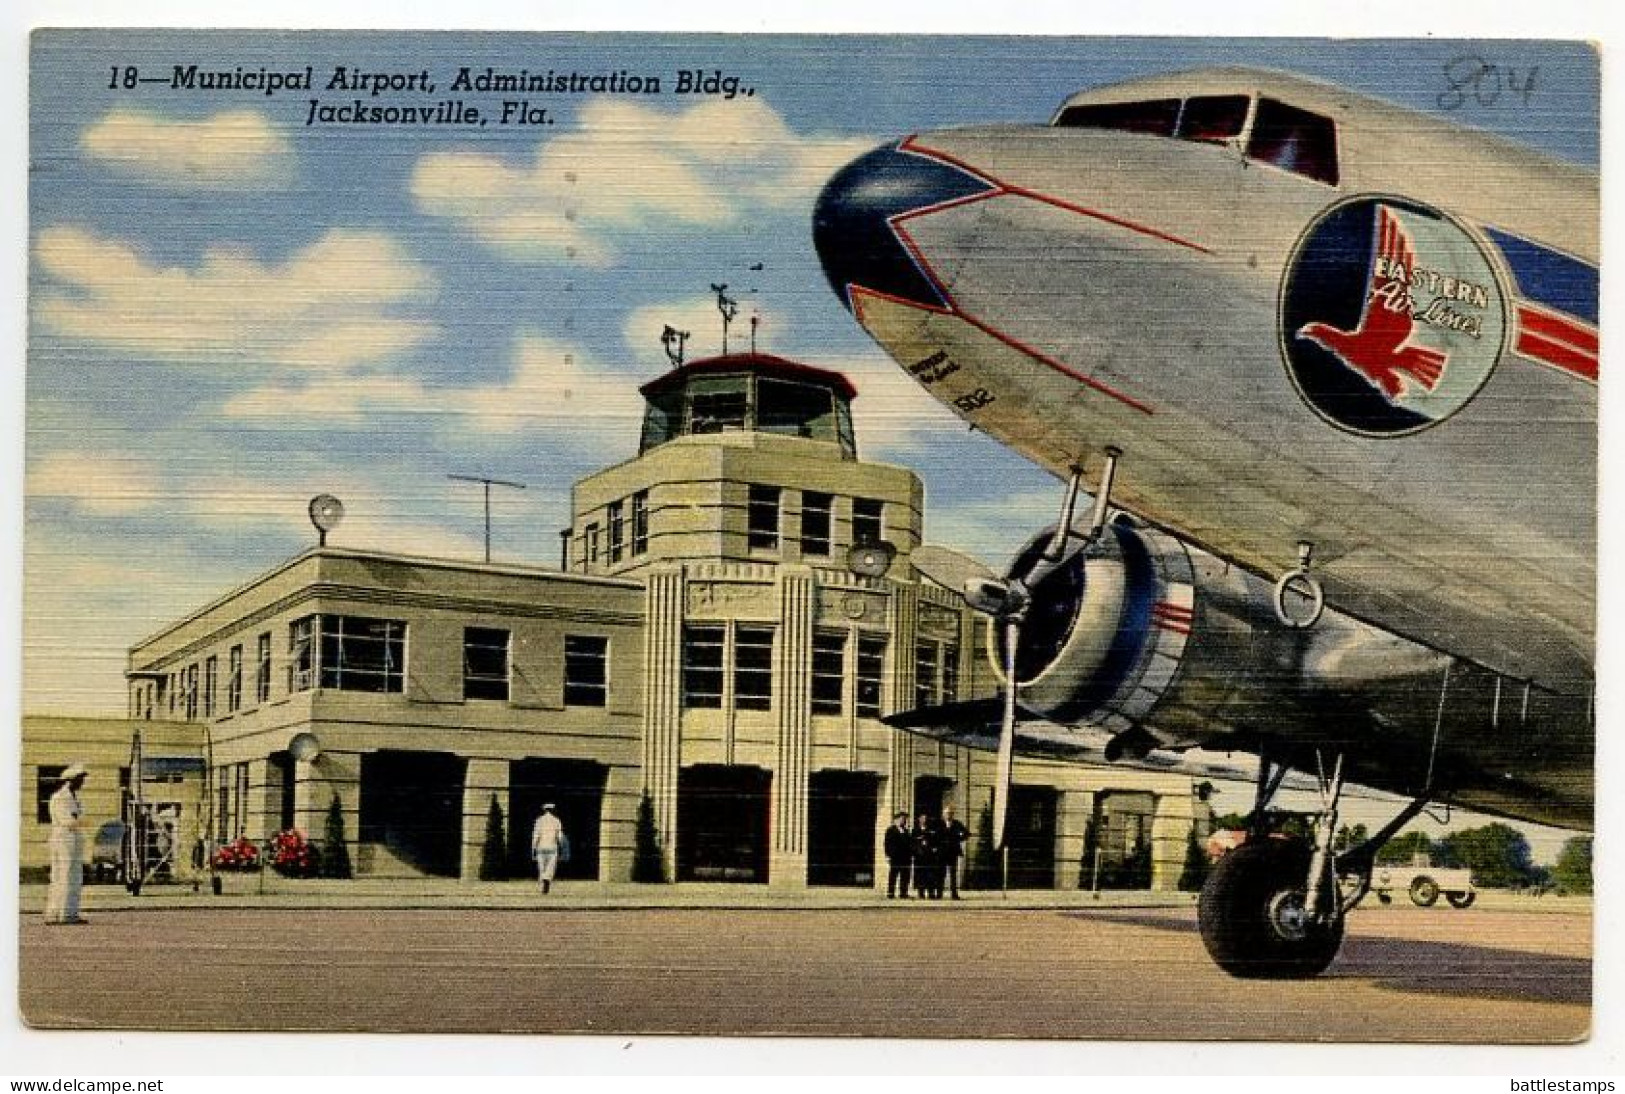 United States 1950 Postcard Jacksonville, Florida - Municipal Airport Administration Building; Eastern Airlines Airplane - Jacksonville